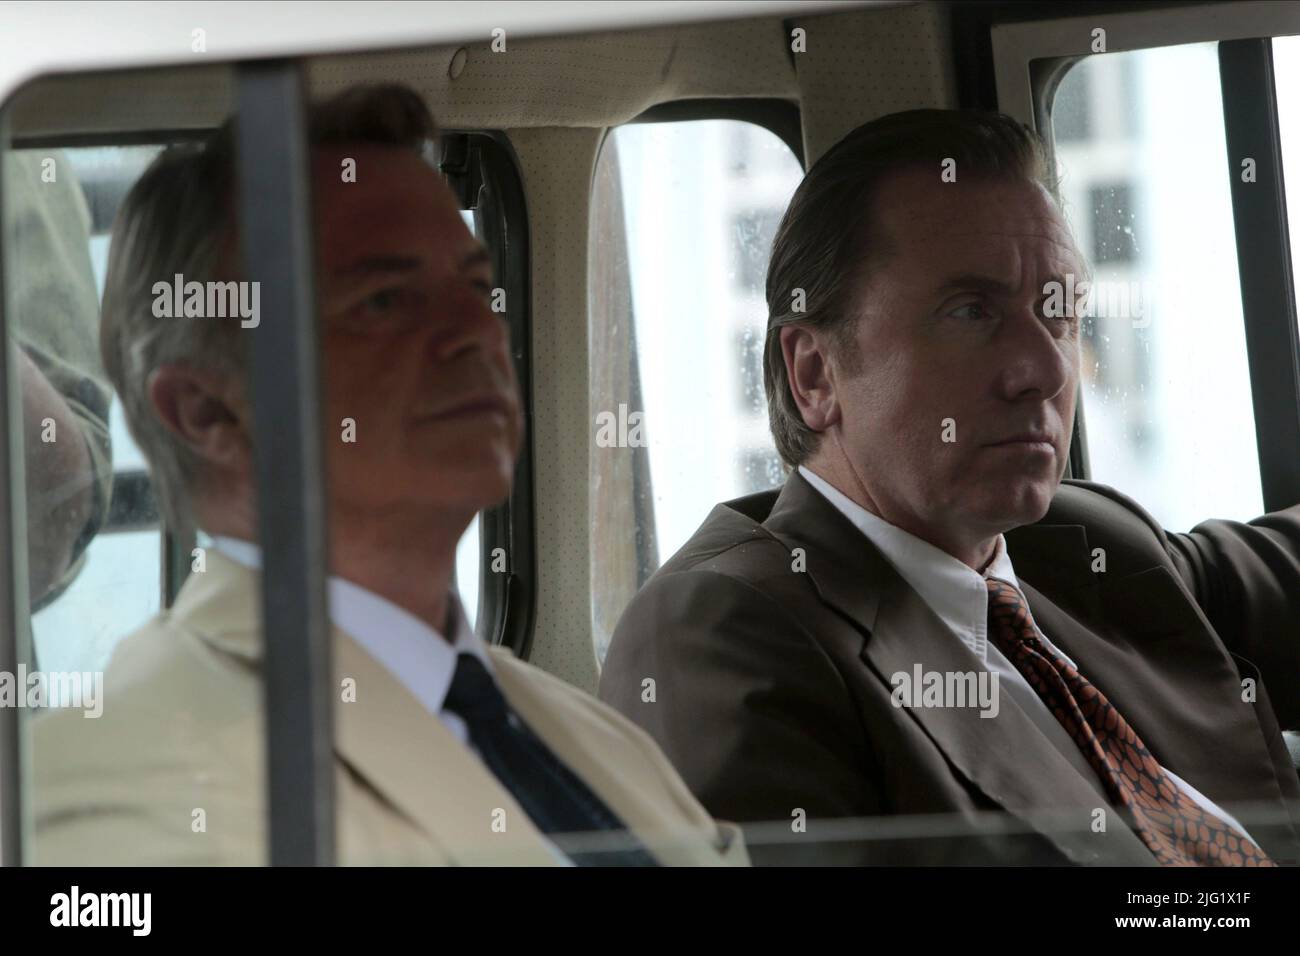 NEILL,ROTH, UNITED PASSIONS, 2014 Stock Photo